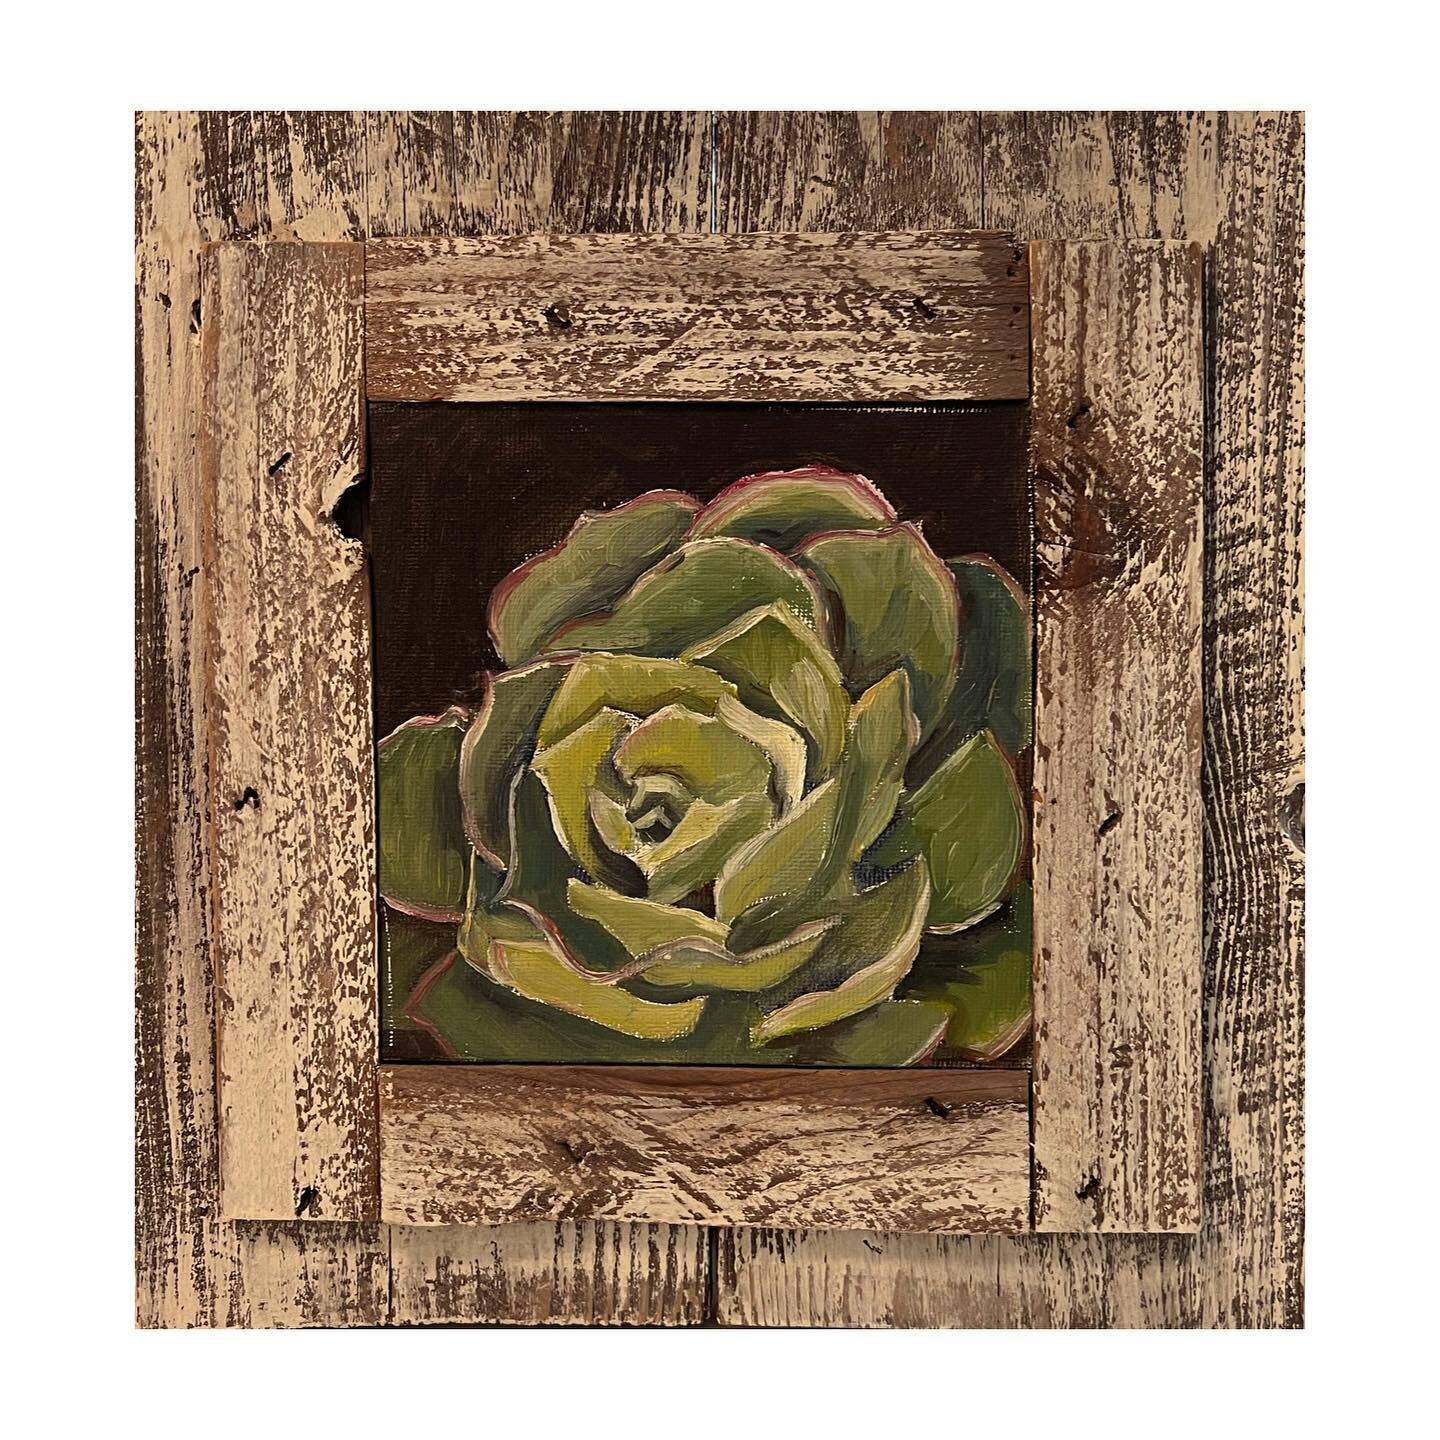 Succulent 1, 6x6 oil on canvas with repurposed wood frame. For sale, $110 plus shipping. #oilpaintingforsale #succulents #oilpainter